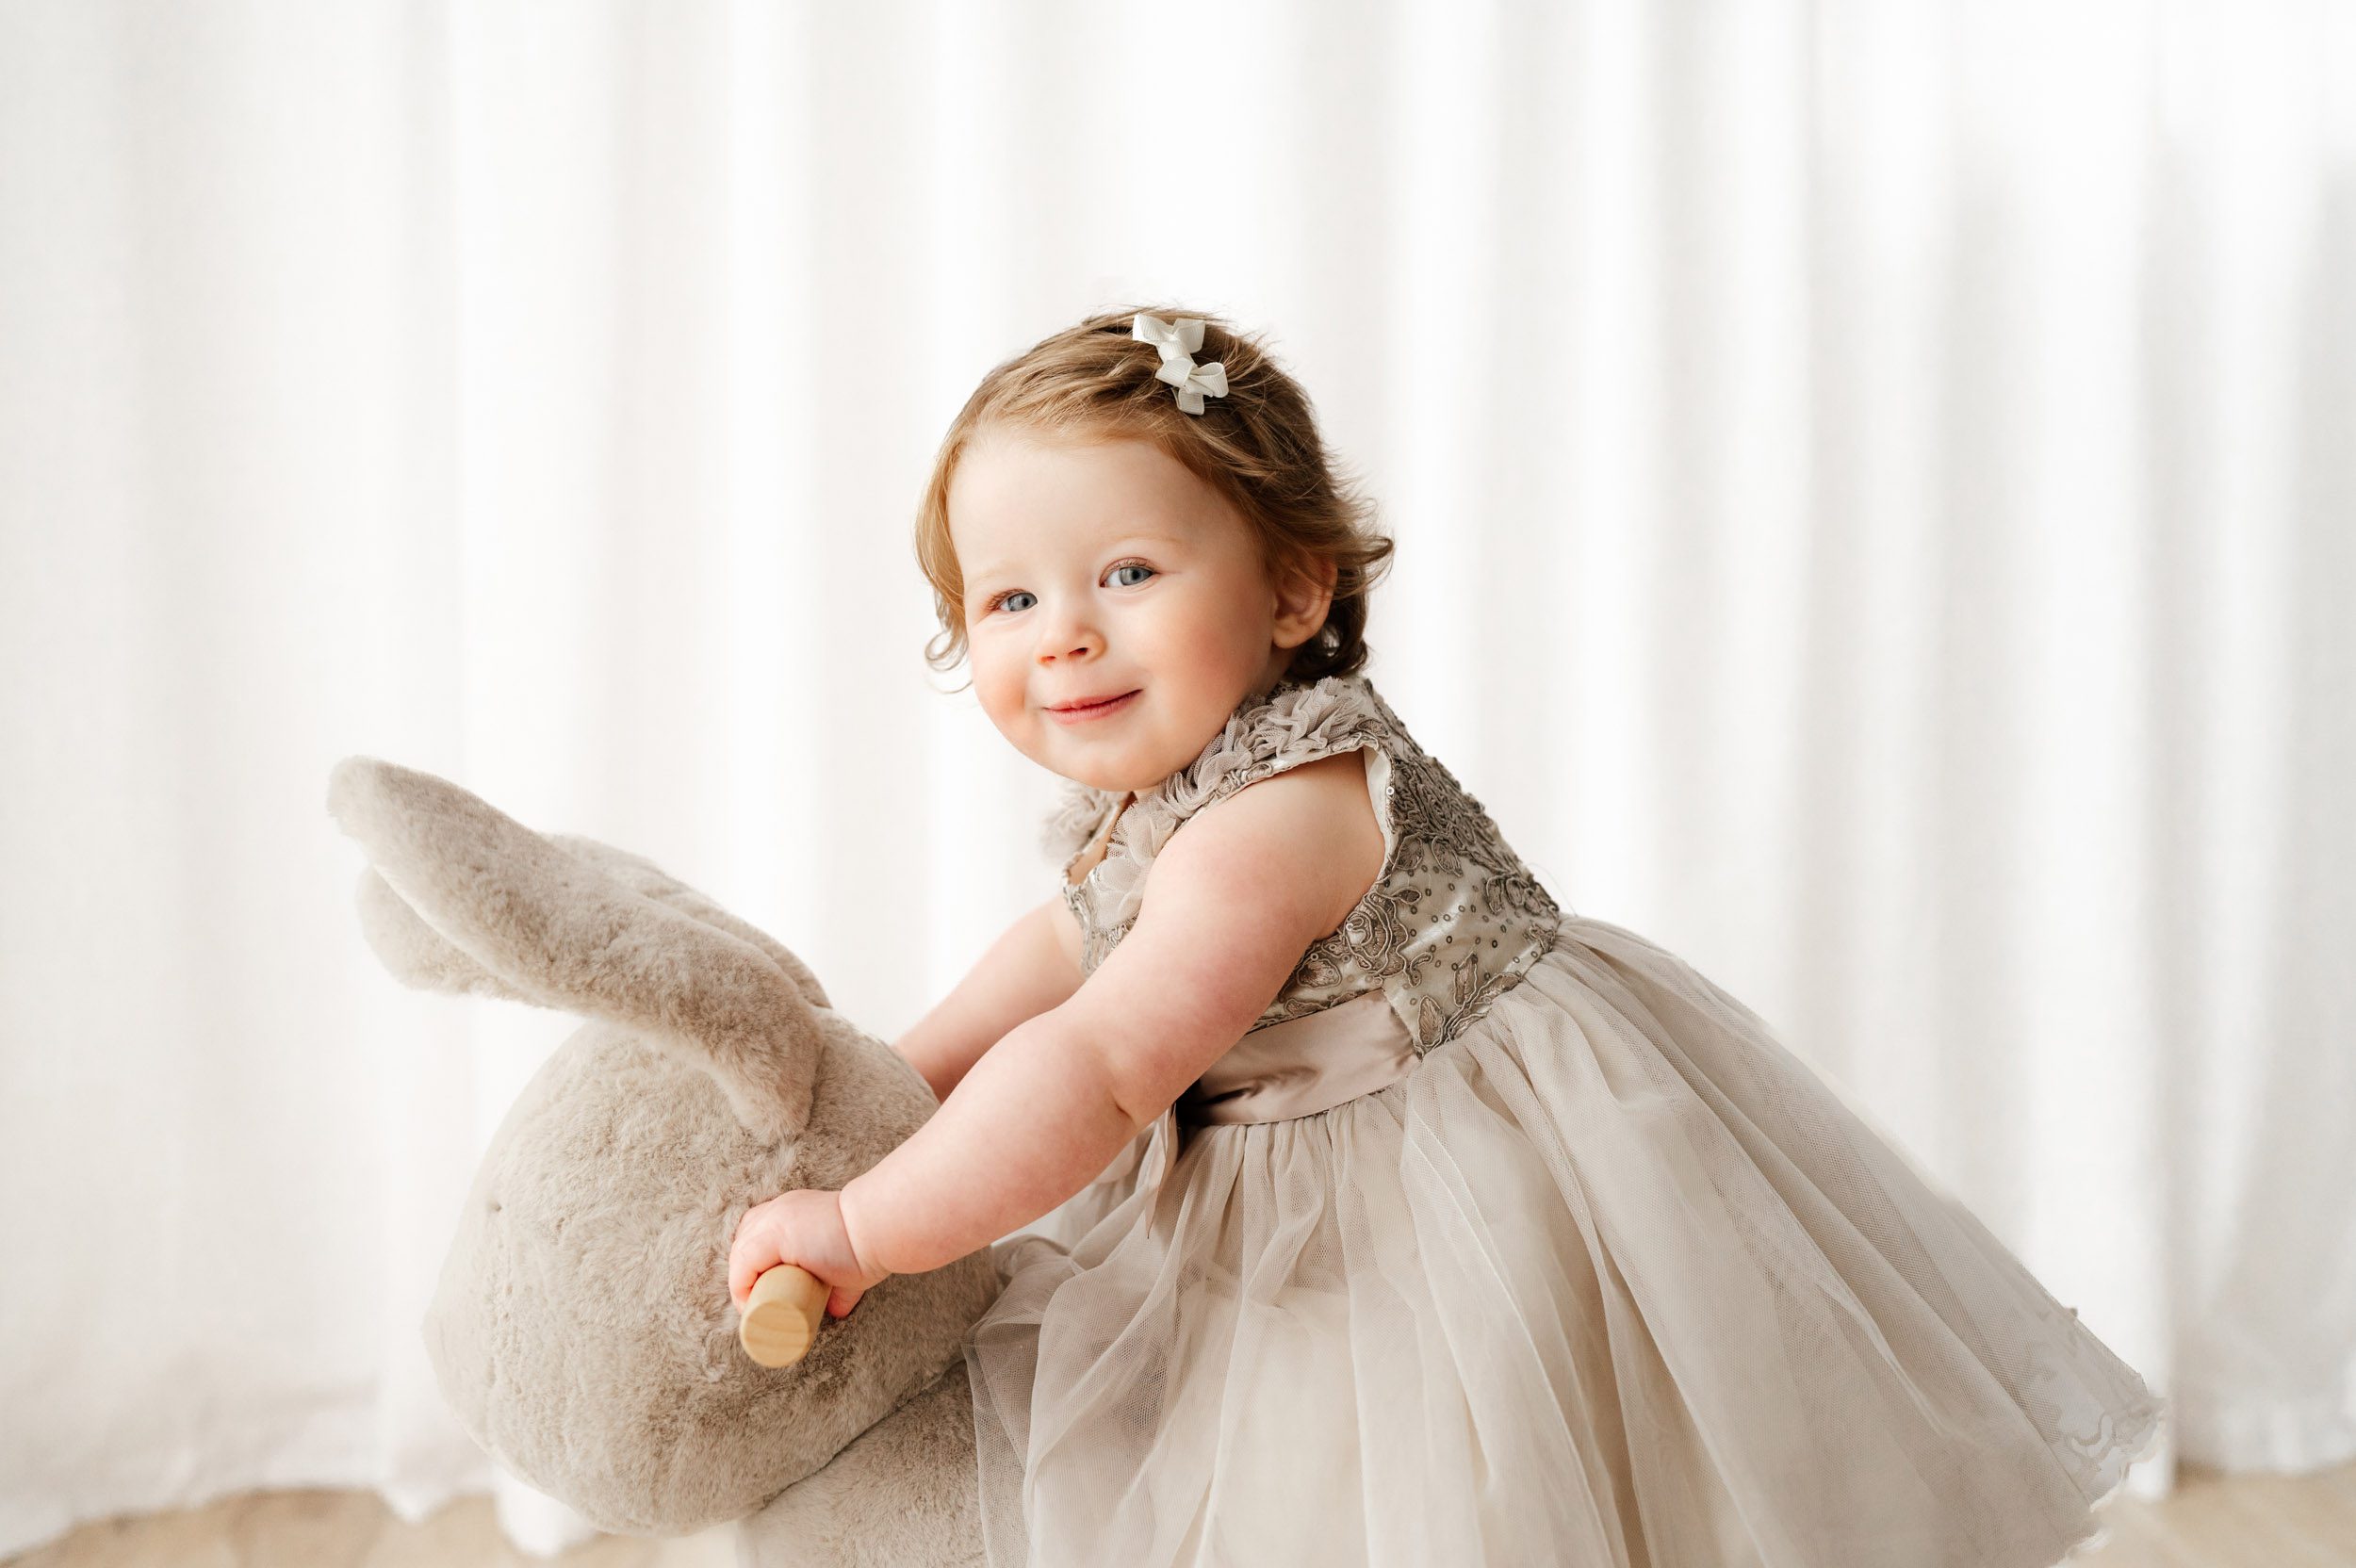 a young girl riding on a bunny rocker toy and looking as she looks at the camera and smiles during a 1st birthday photoshoot